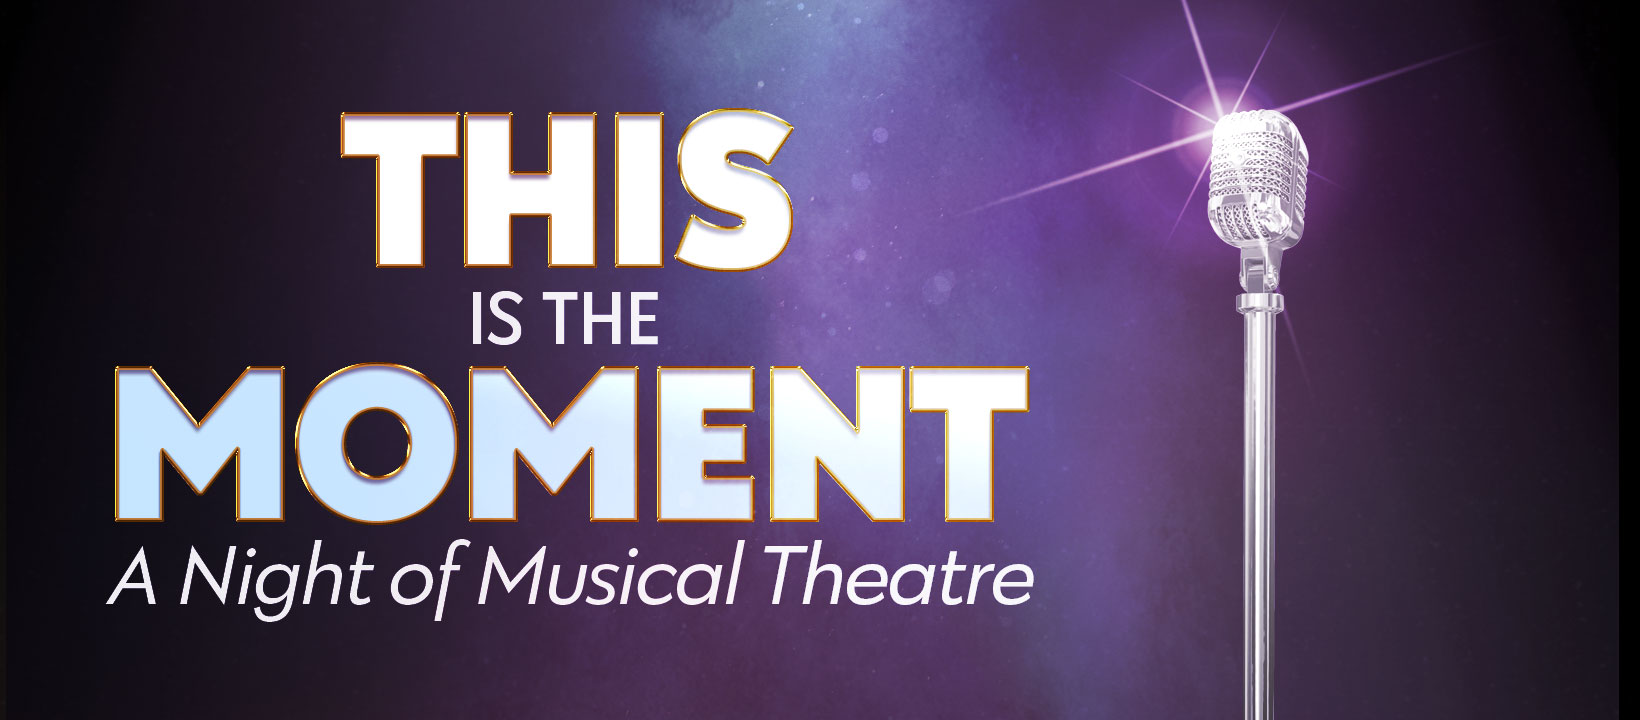 This is the Moment: A Night of Musical Theatre